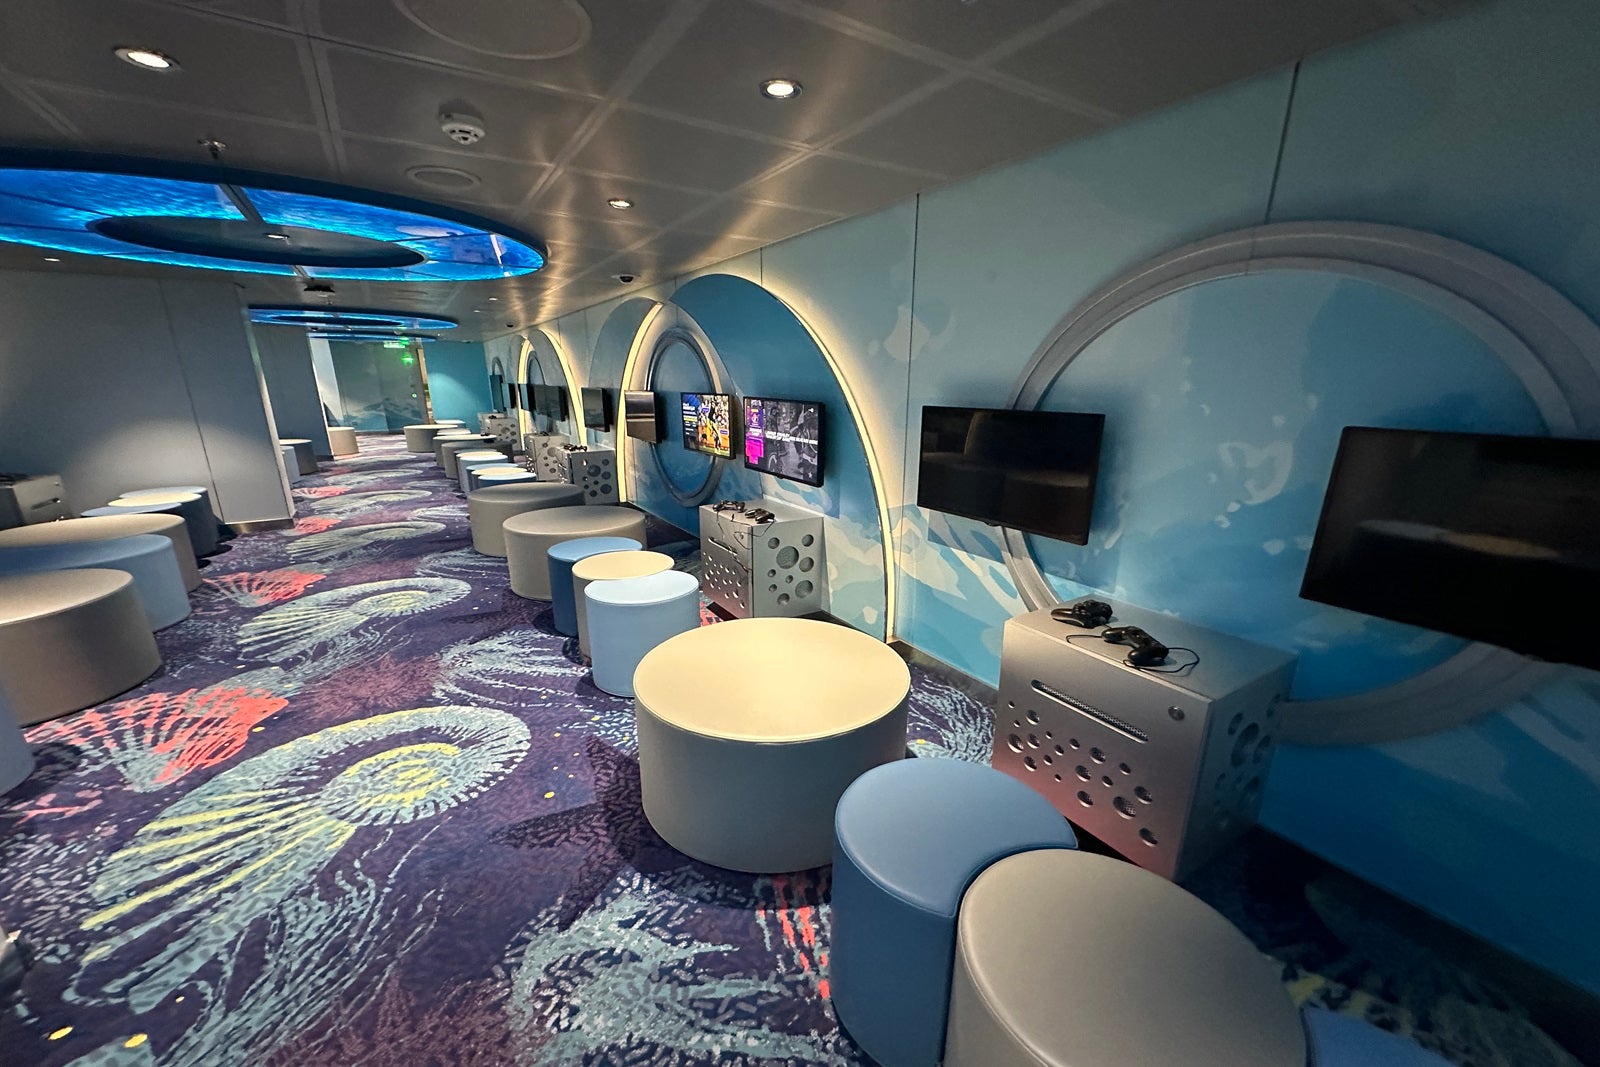 A large carpeted room with cyllindrical stools set around multiple TVs with video game stations